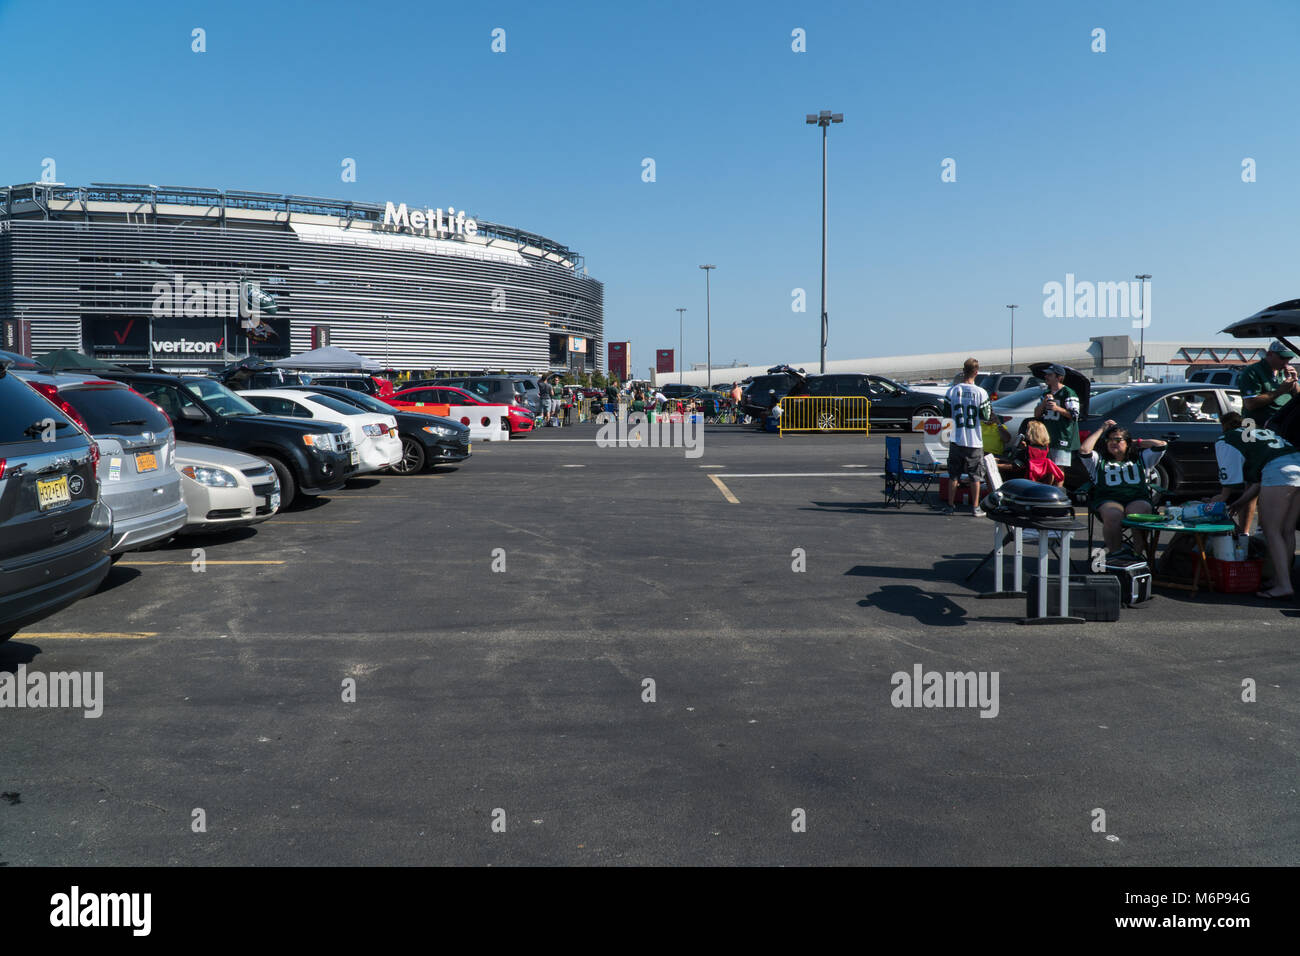 Meadowlands, New Jersey - Circa 2017: New York Jets fans tailgate in the  parking lot outside Metlife Stadium before american football game during a  su Stock Photo - Alamy